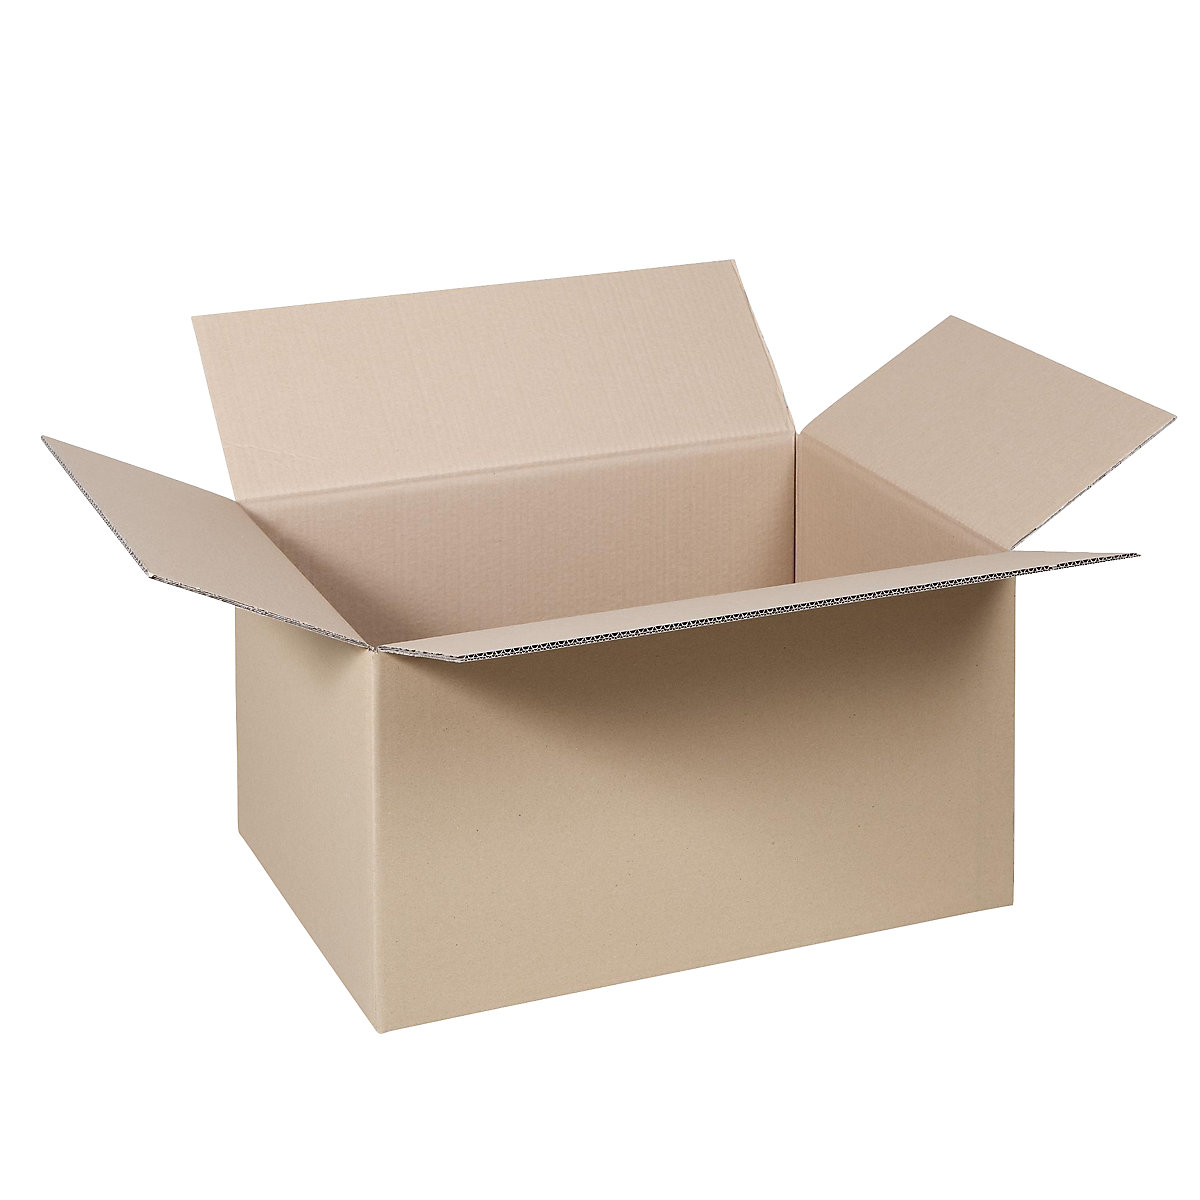 Folding cardboard box, FEFCO 0201, made of double fluted cardboard, internal dimensions 300 x 200 x 170 mm, pack of 50-24